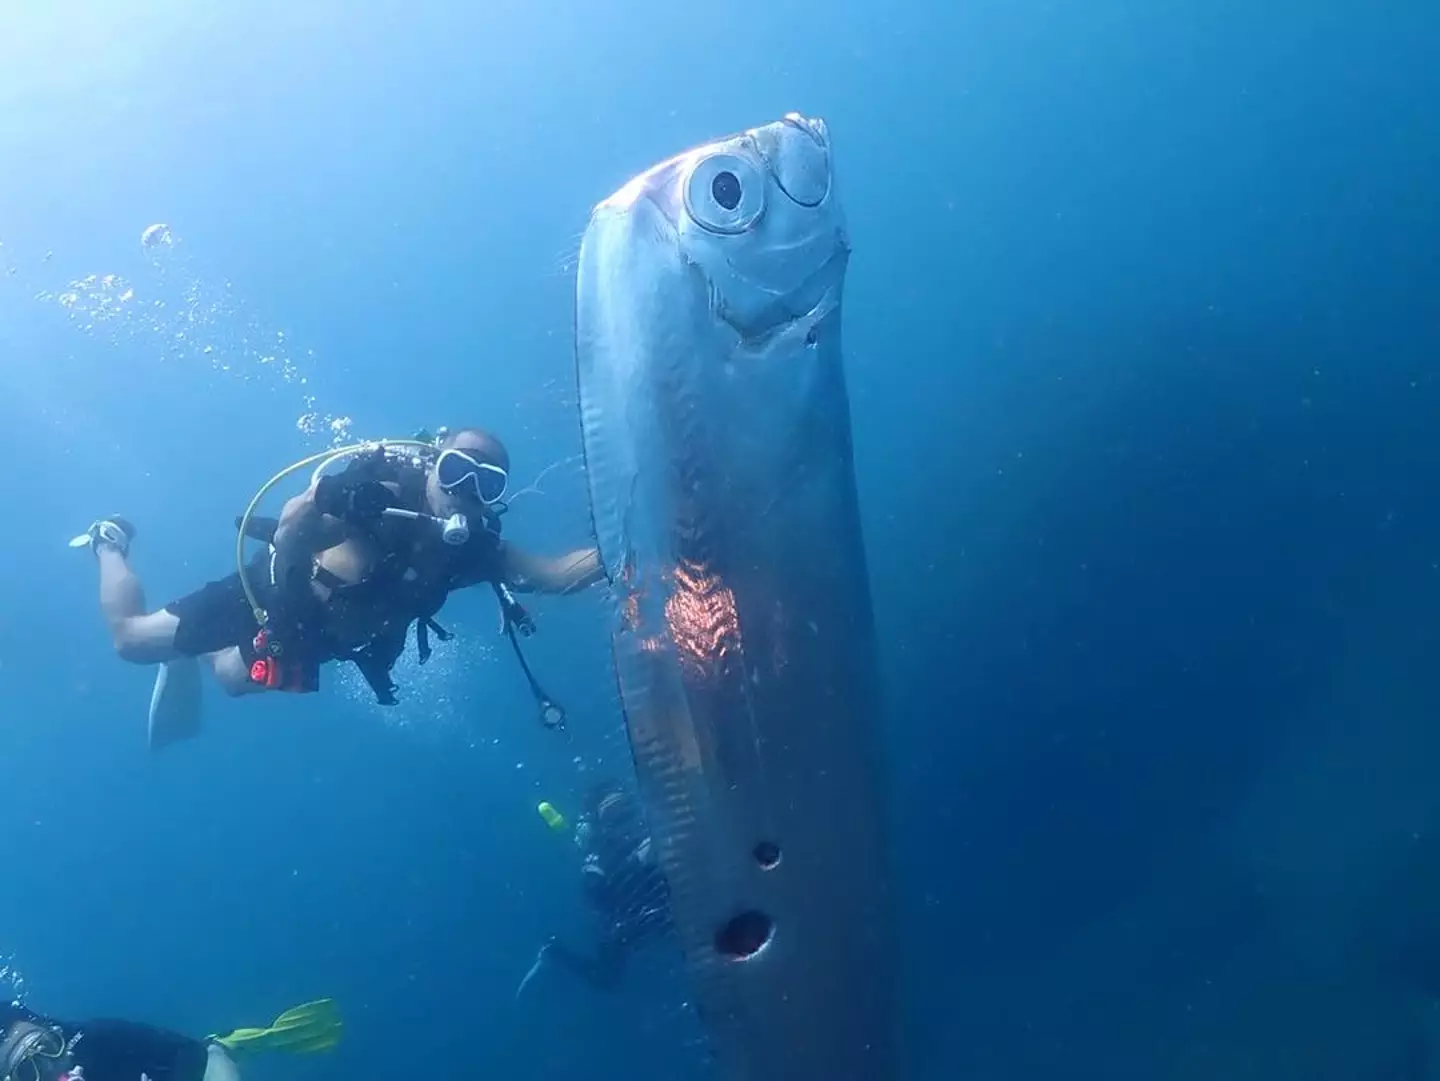 The giant fish was spotted by diving instructor Wang Cheng-Ru.